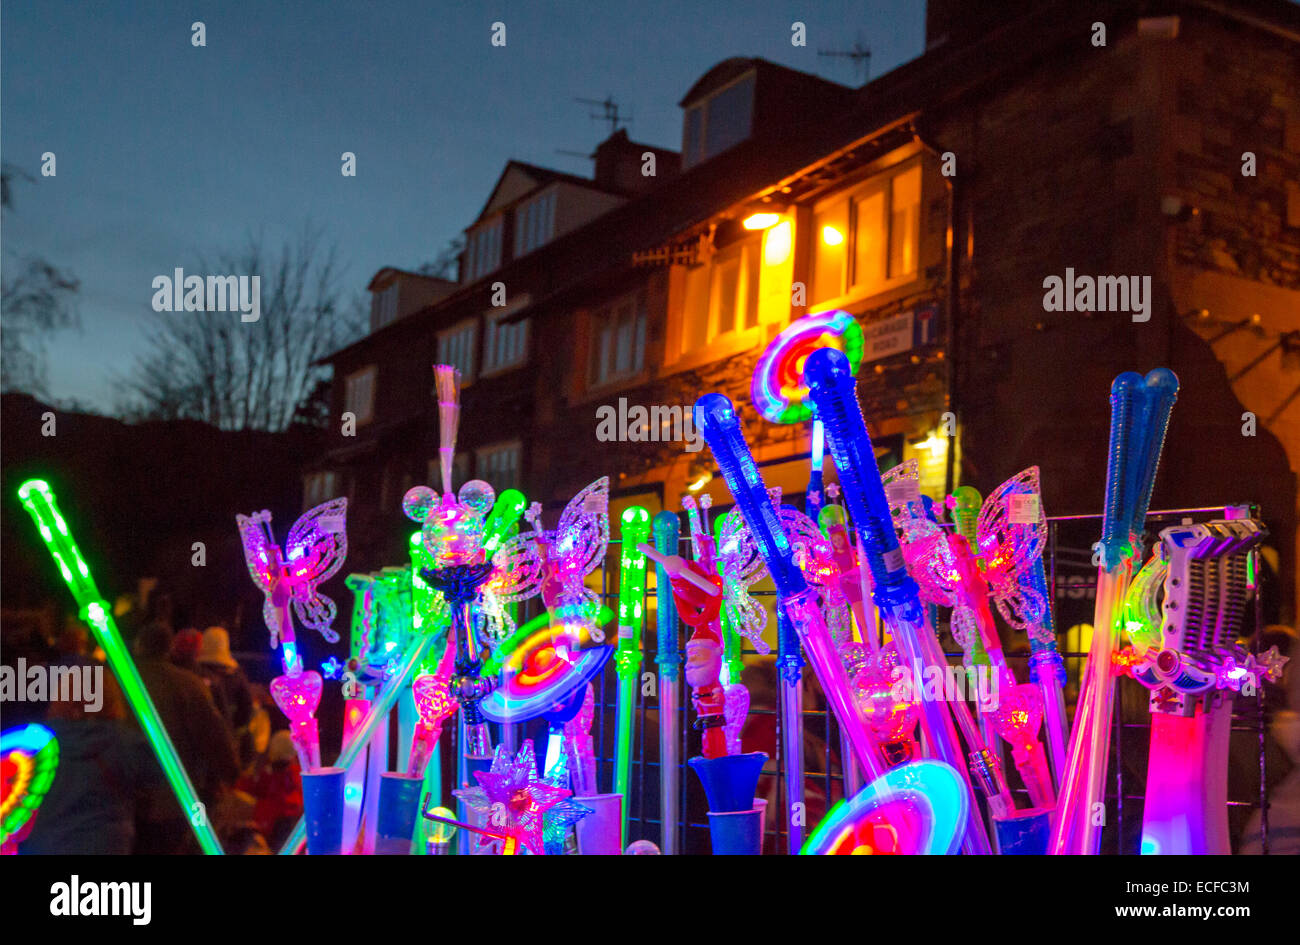 Neon light toys for sale at a stall in Ambleside, UK Stock Photo - Alamy